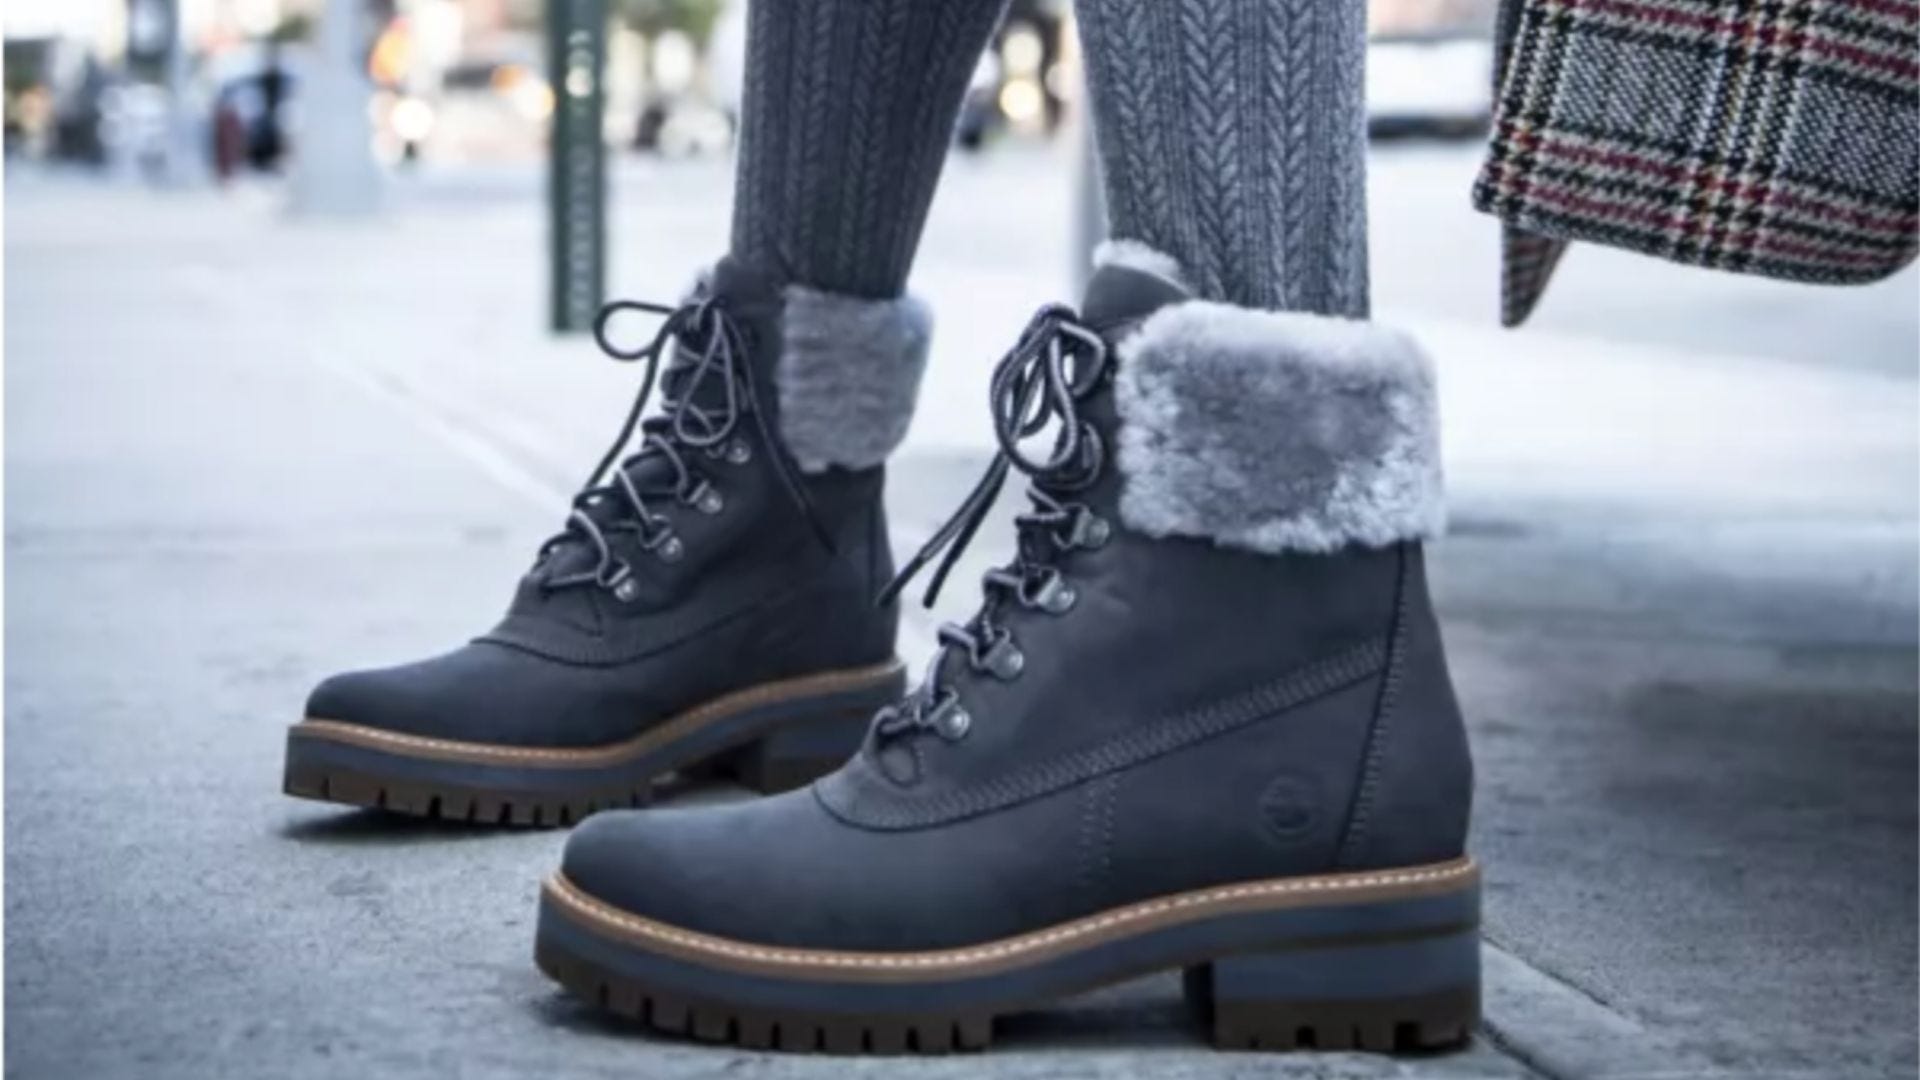 The best Ugg and boot deals right now